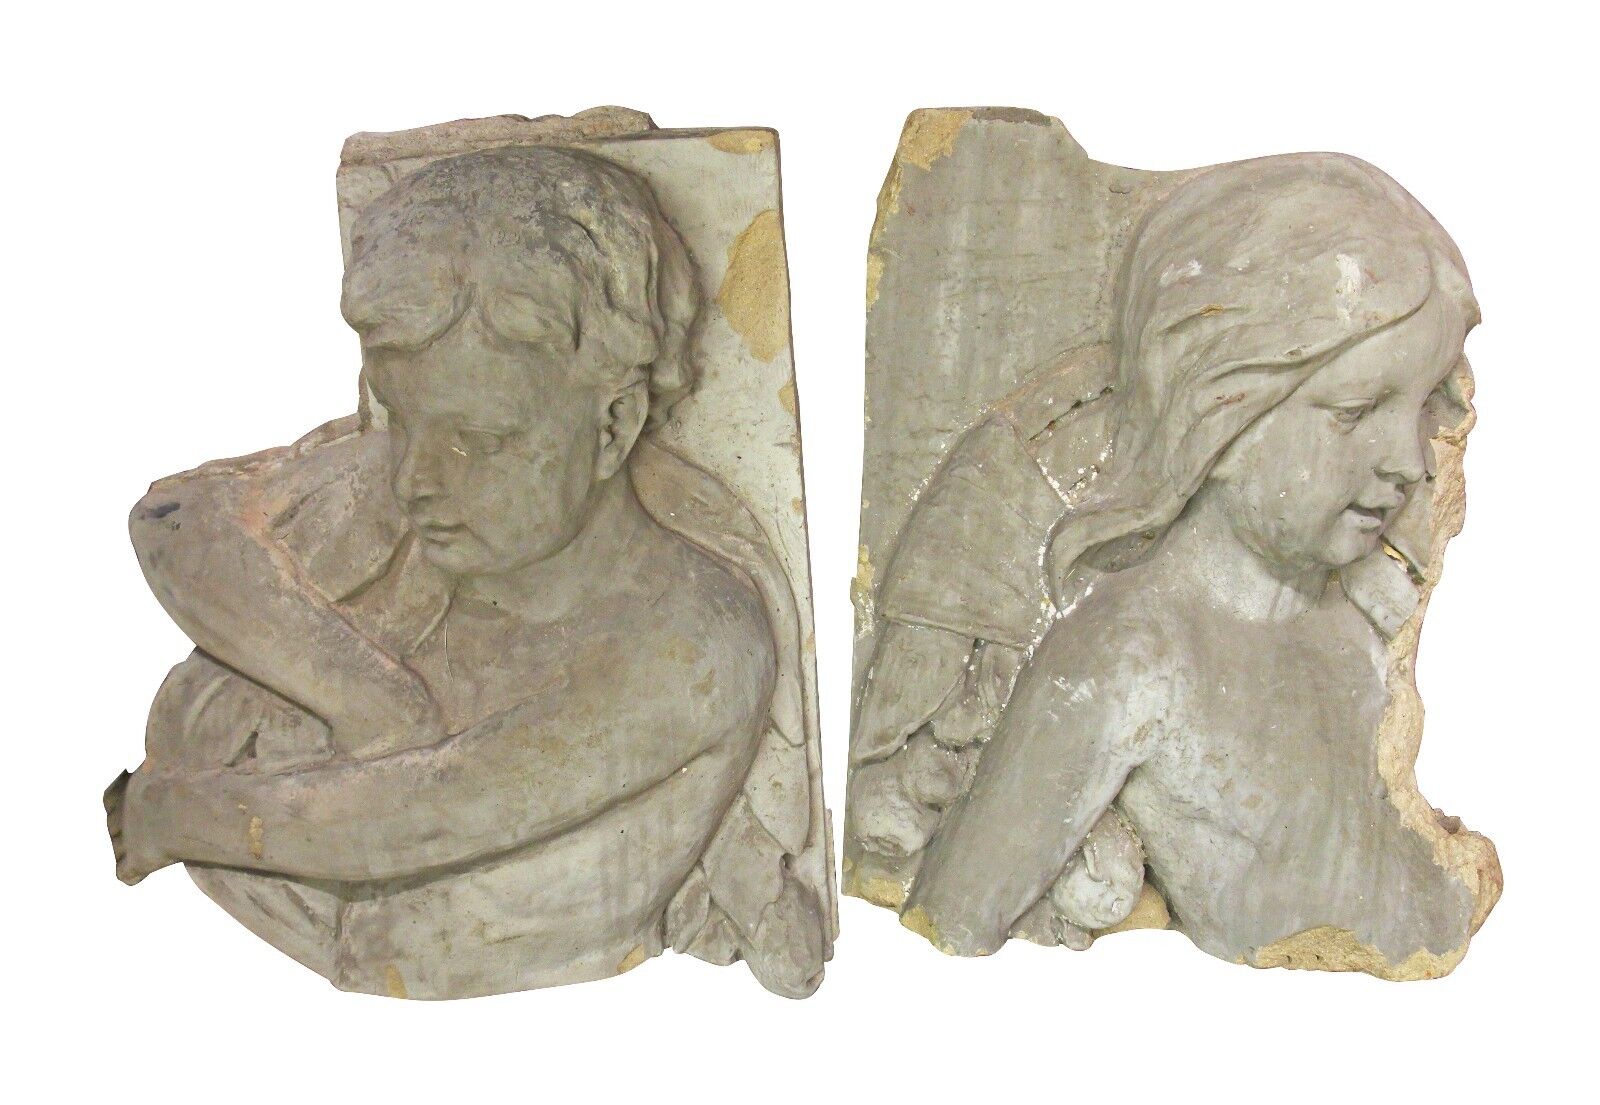 Historic Pair Of Boy And Girl Figures From A Terra Cotta Frieze